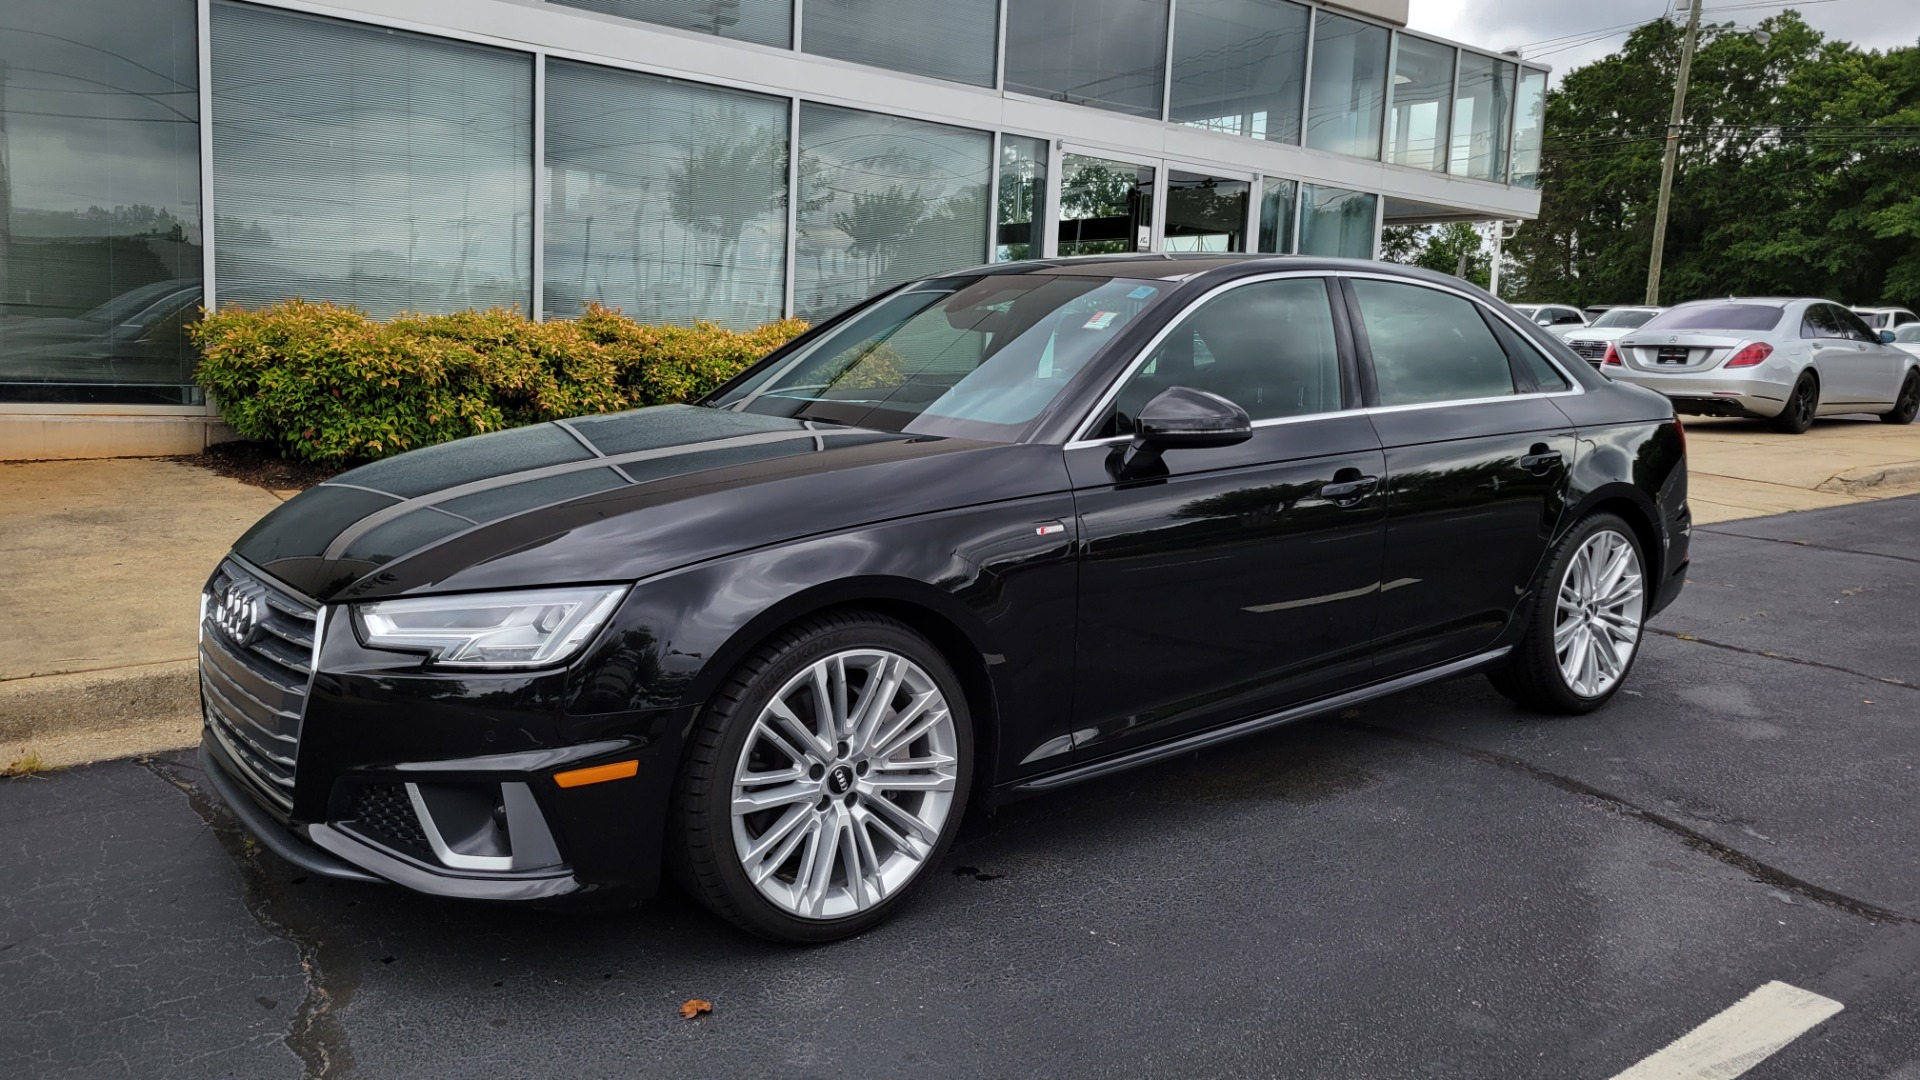 Used 2019 Audi A4 PREMIUM PLUS QUATTRO / SPORT / NAV / SUNROOF / REARVIEW for sale $37,495 at Formula Imports in Charlotte NC 28227 1